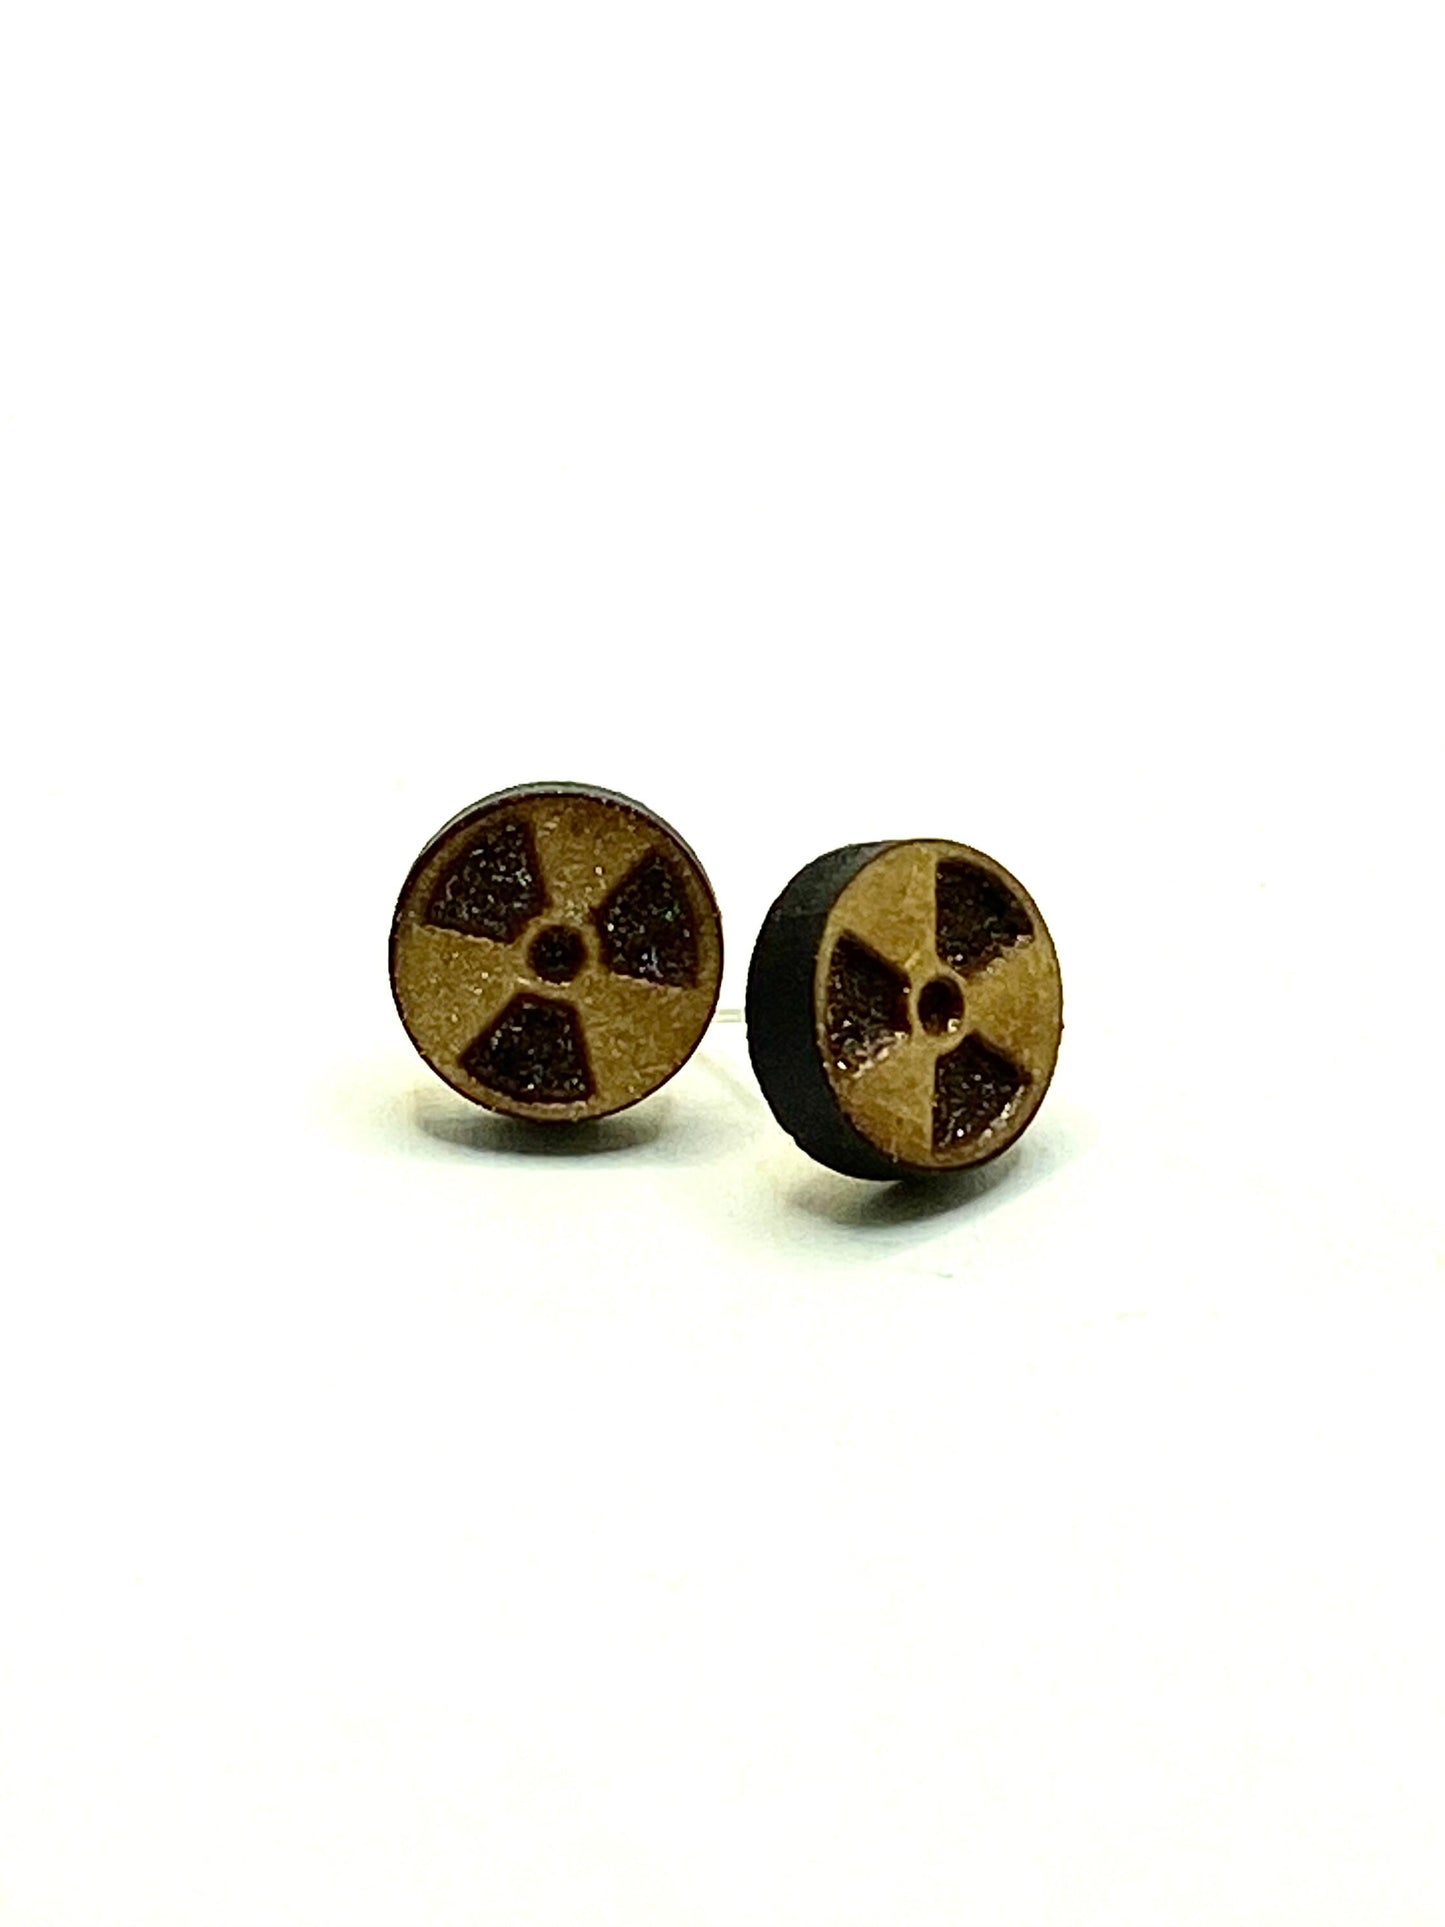 Xray Wooden Earrings with Sterling Silver Studs Hypoallergenic